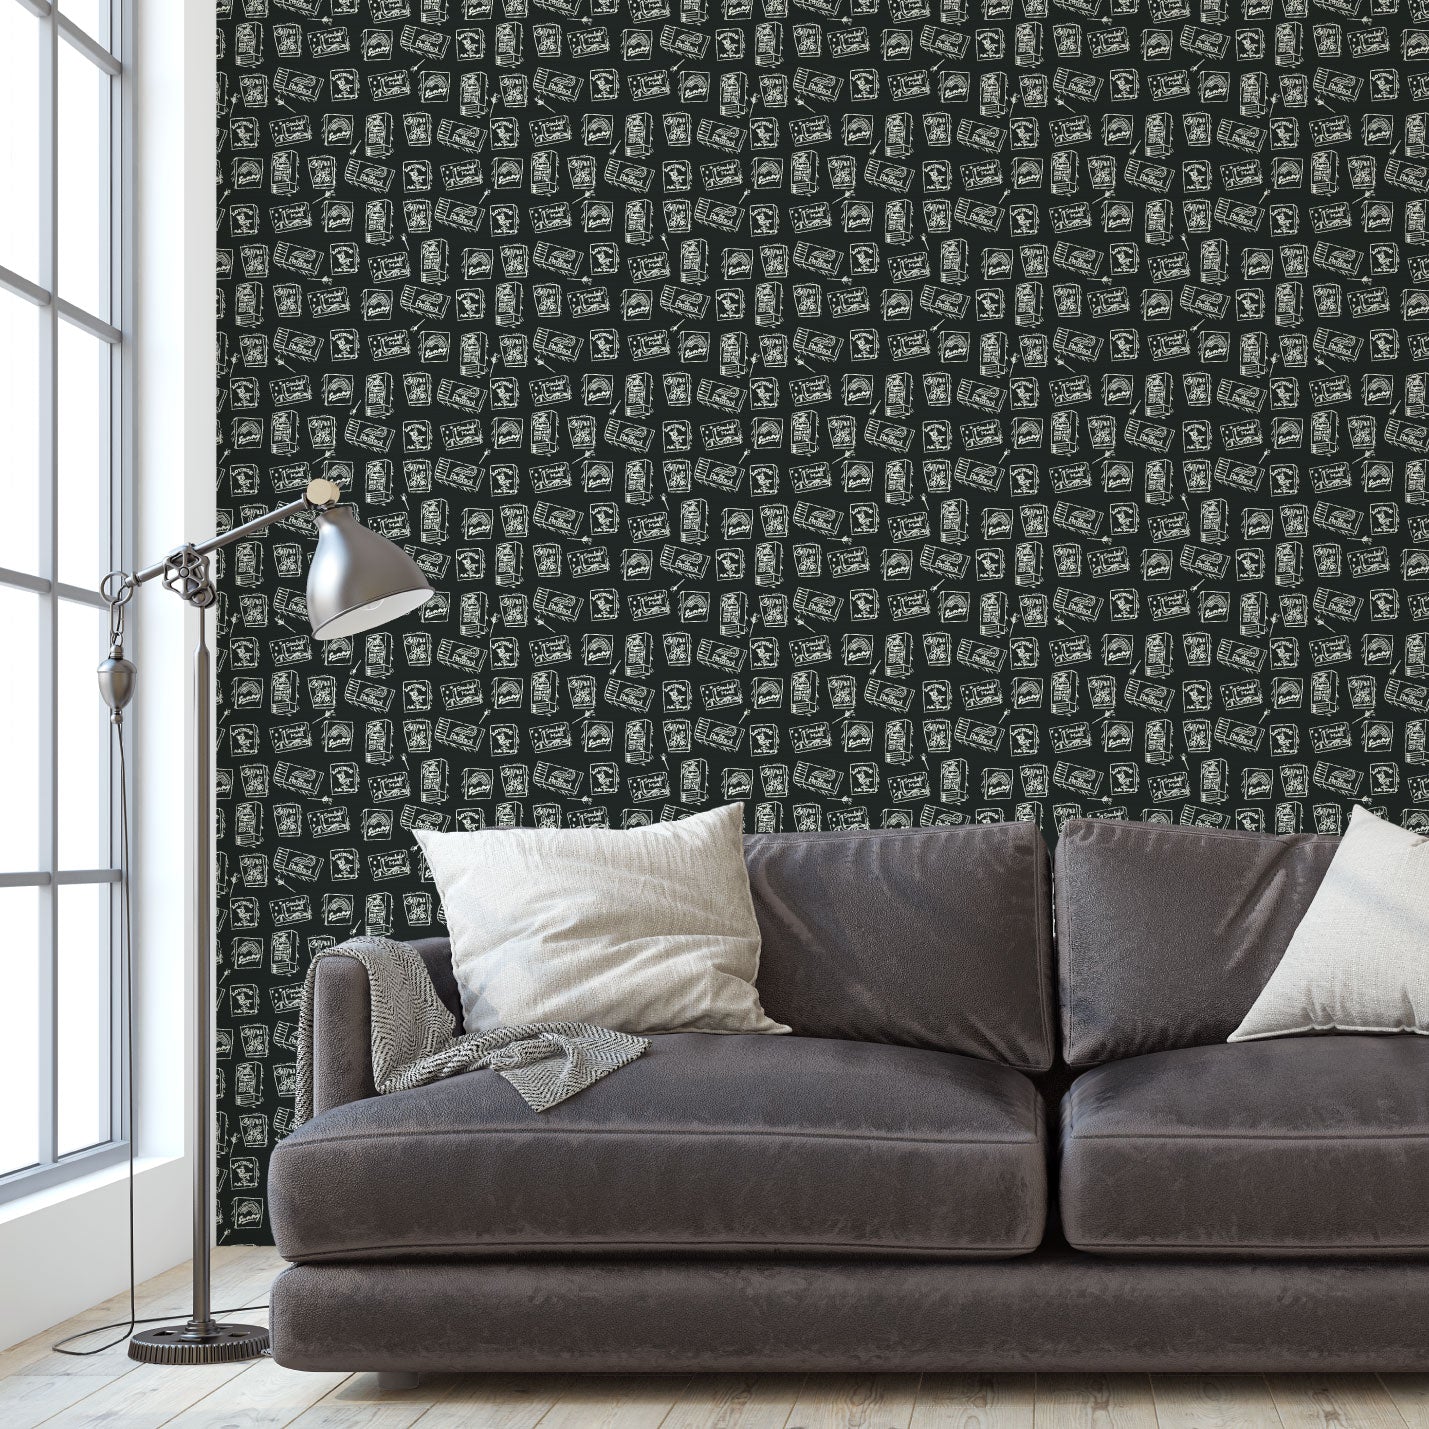 grasscloth wallpaper natural textured eco-friendly non-toxic high quality sustainable interior design modern funny bar small space matches matchbook match lounge watering hole black white living room lounge sitting room